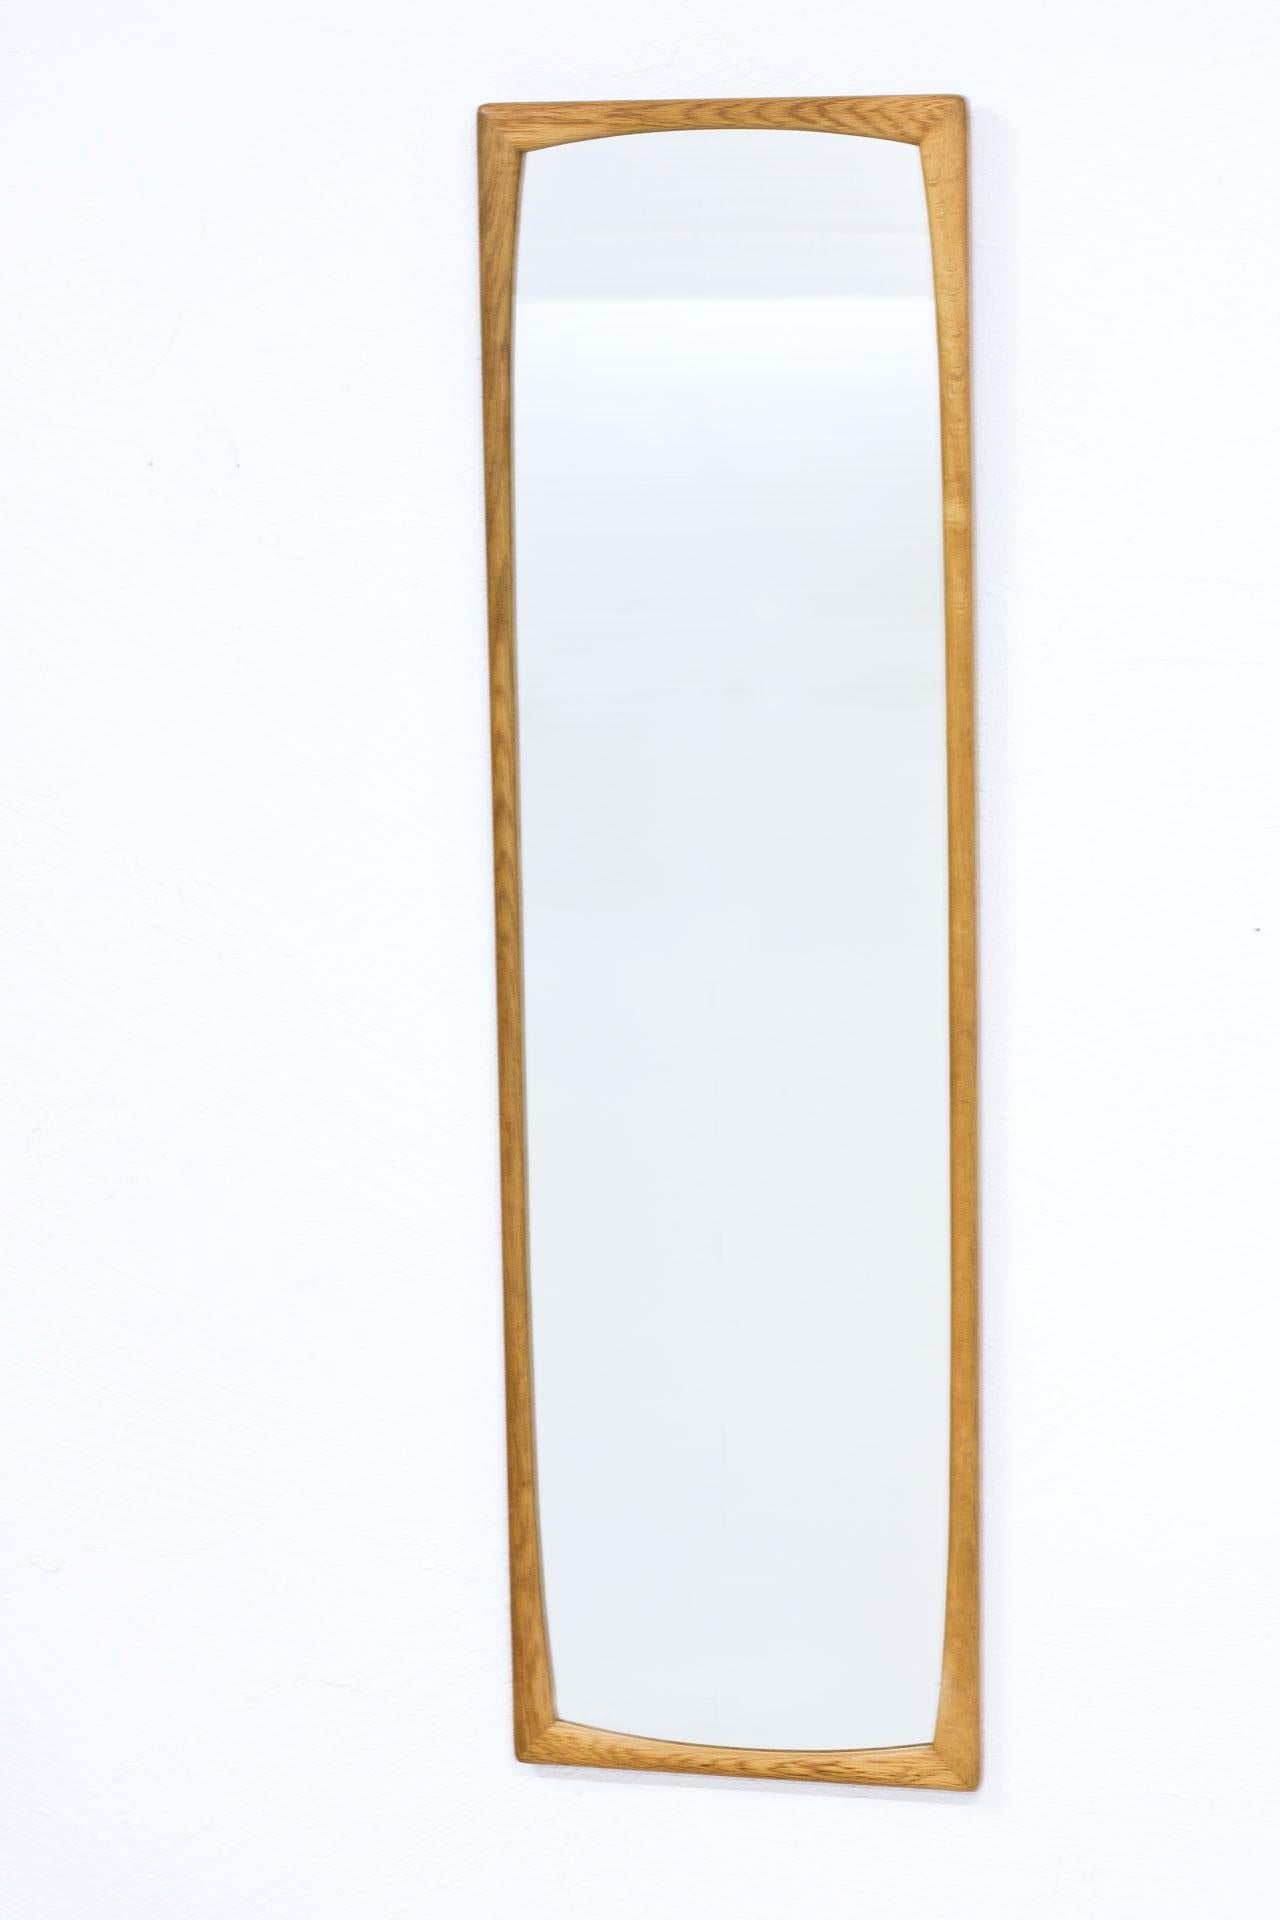 Rectangular wall mirror model “619?
manufactured by Fröseke in Sweden
during the 1950s. Solid oak frame.